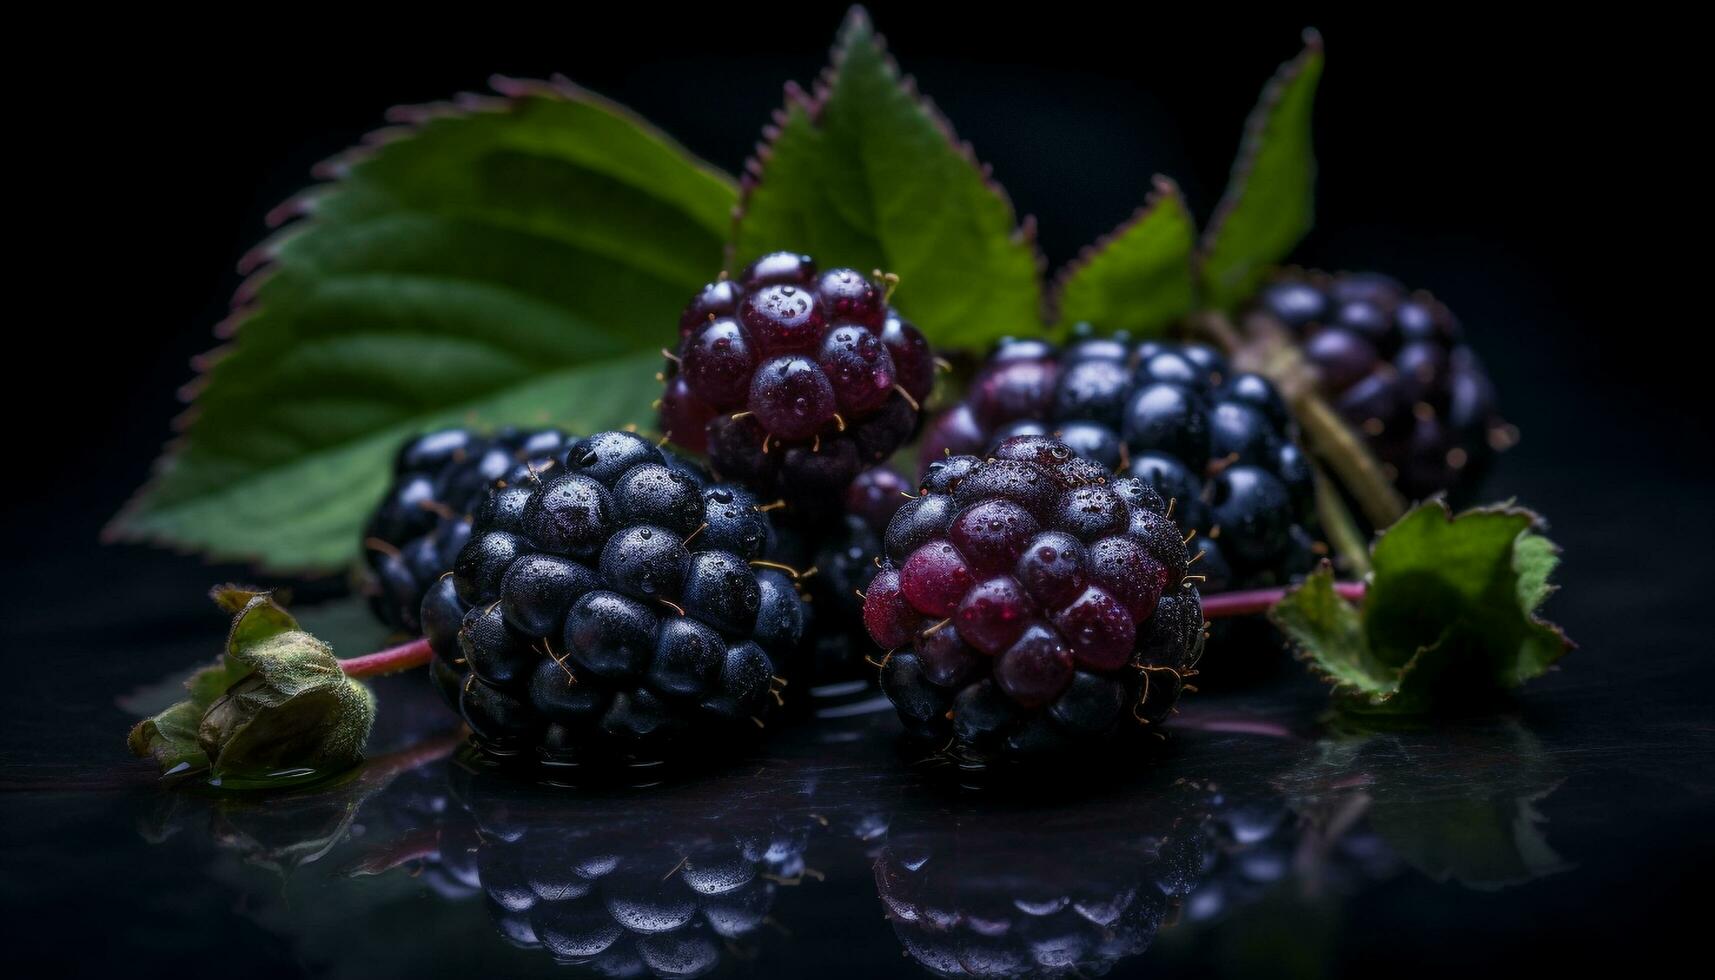 Freshness of nature bounty juicy, ripe berry, a healthy snack generated by AI photo